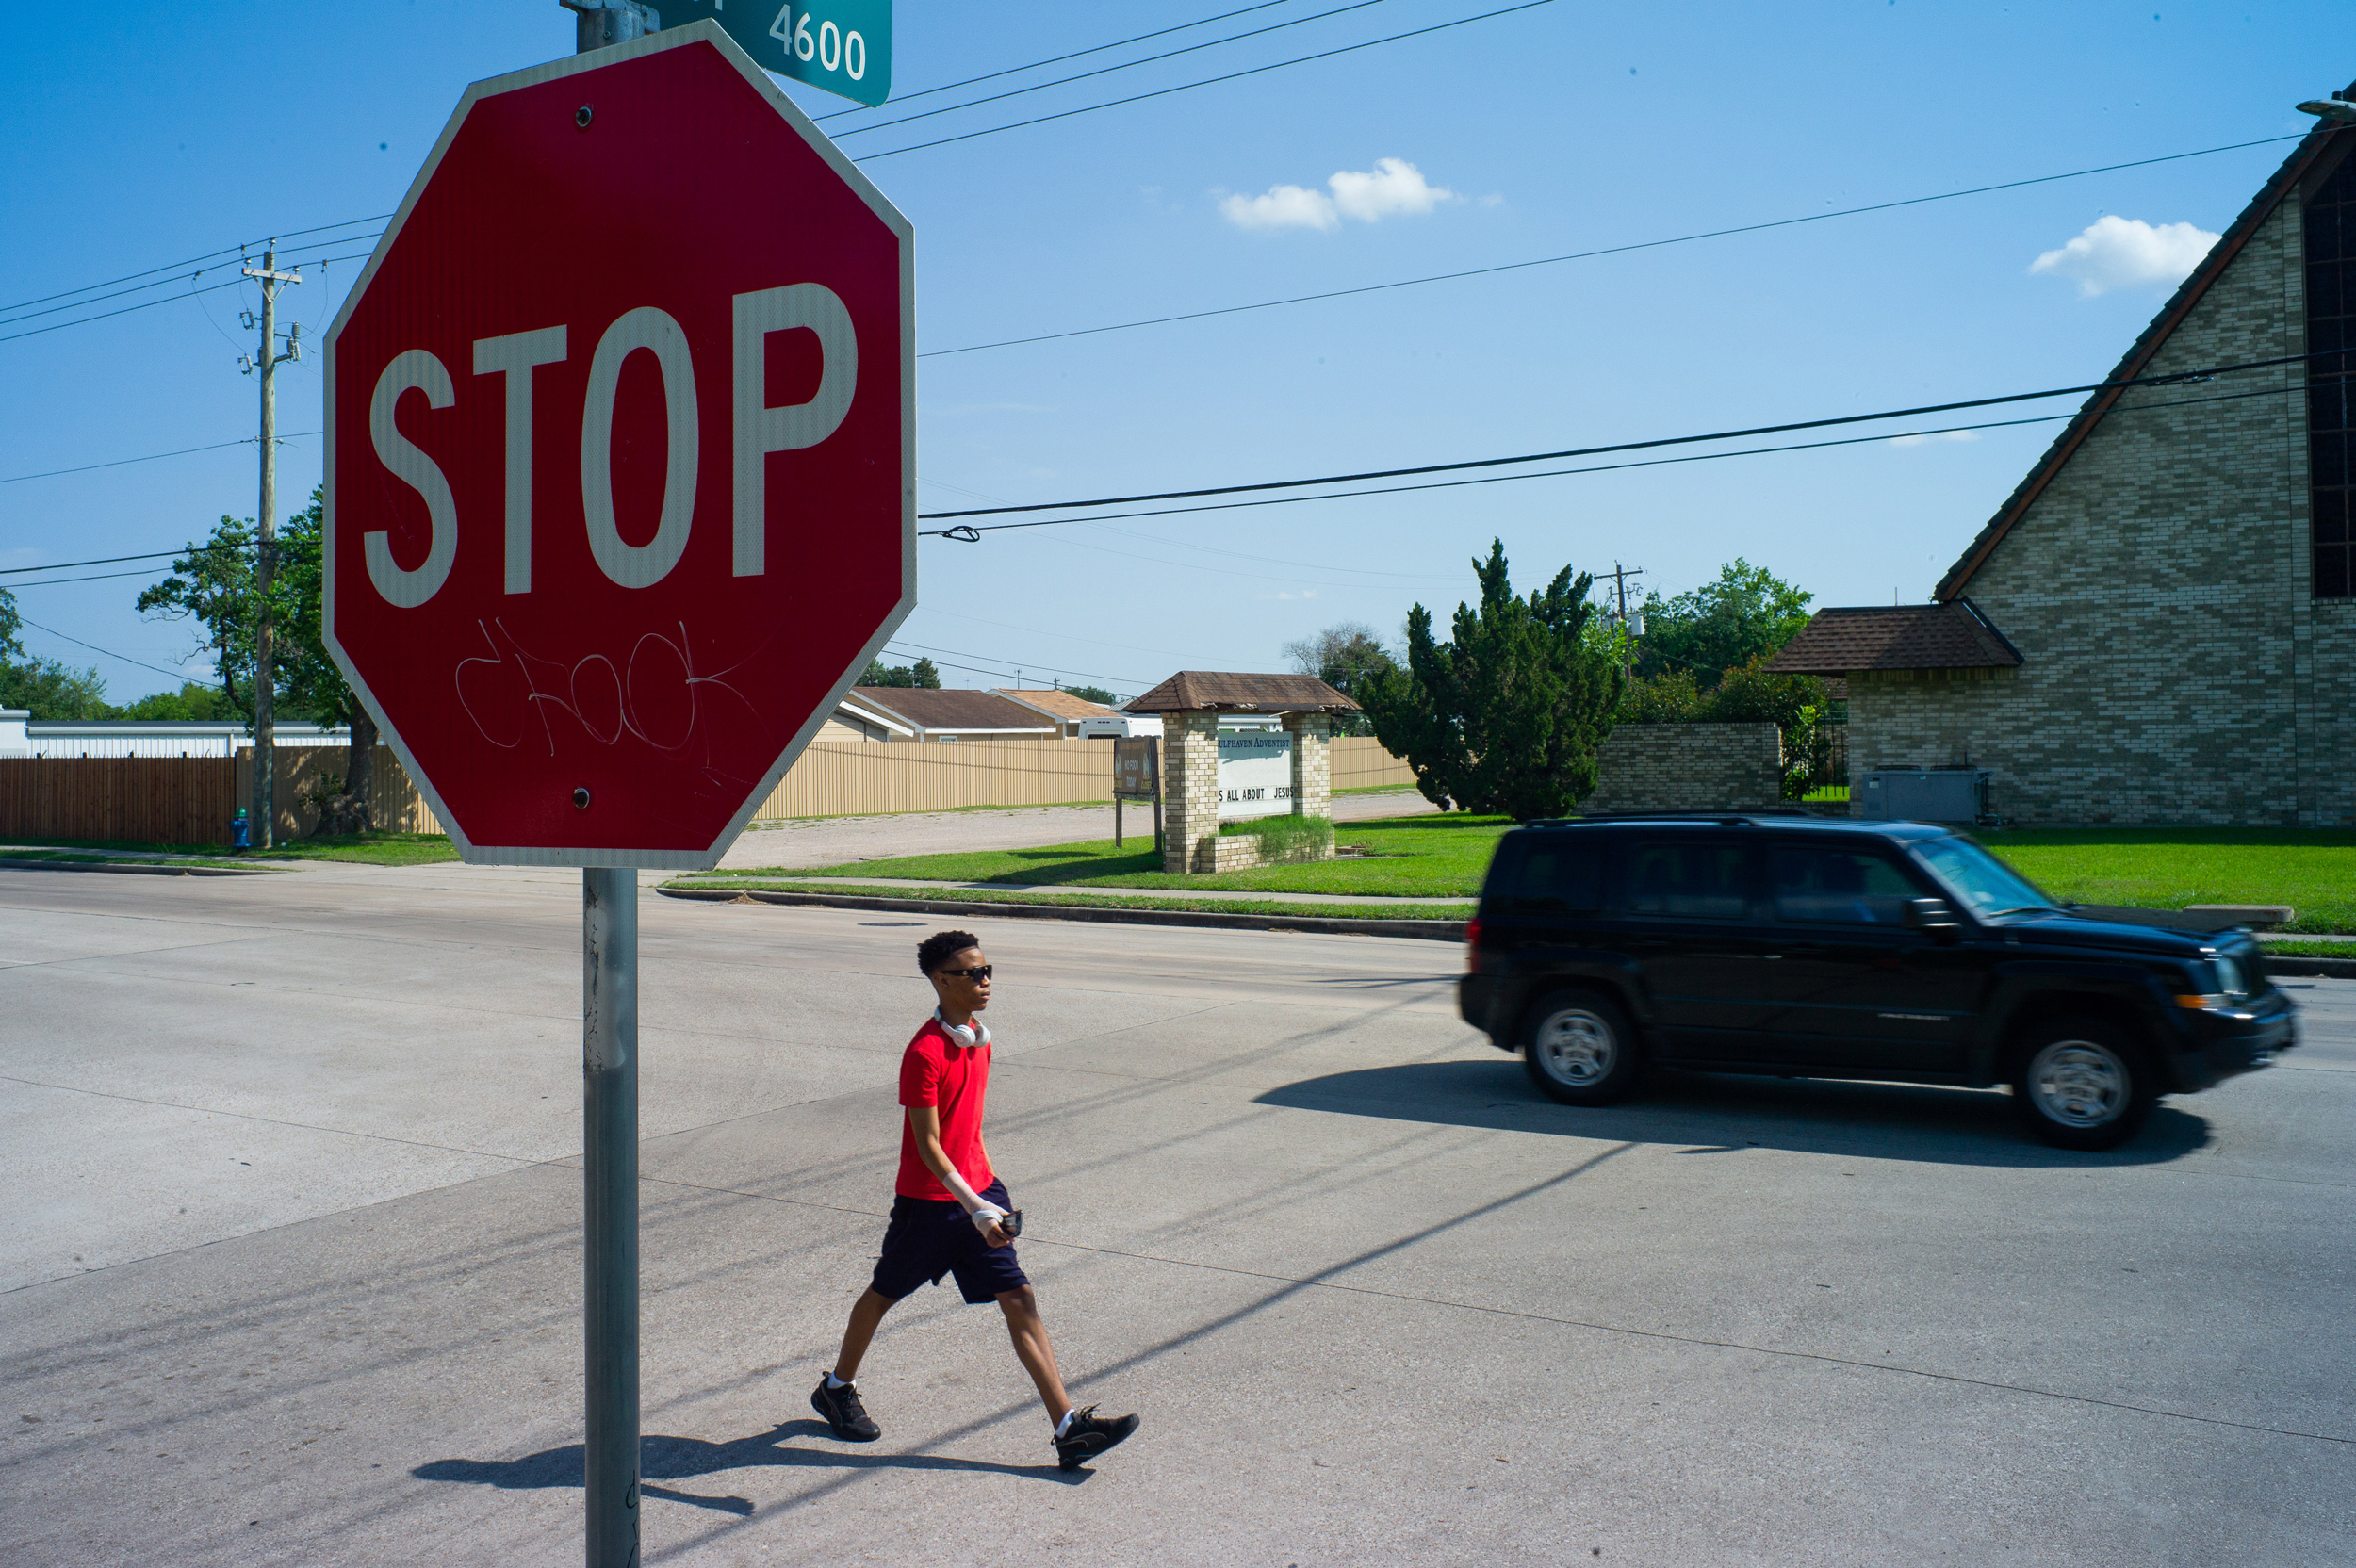 A person walks in front of a stop sign in an intersection